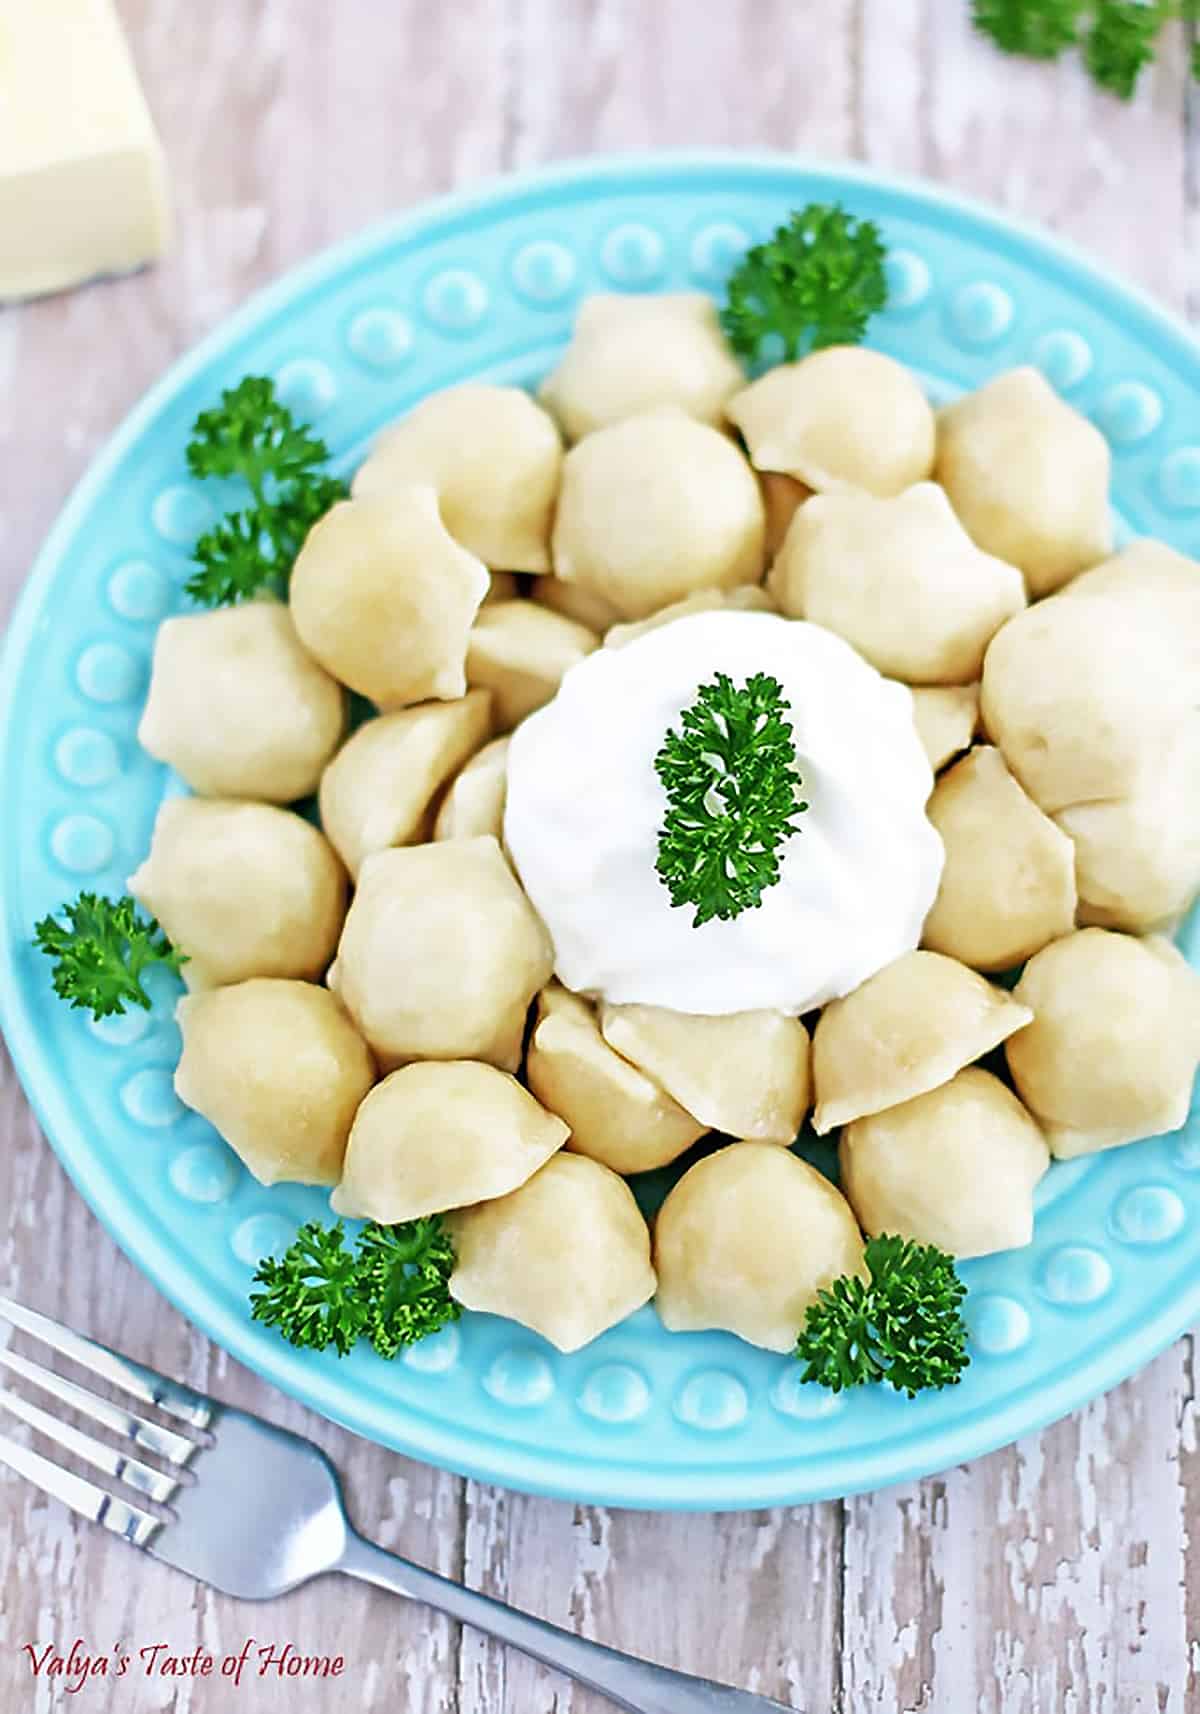 Pelmeni is dumplings that consist of a meat filling wrapped in thin, unleavened dough. Boiled in water, dressed in butter, and served with a gallop of sour cream. They have always been a family favorite and my kids’ frequent requests.